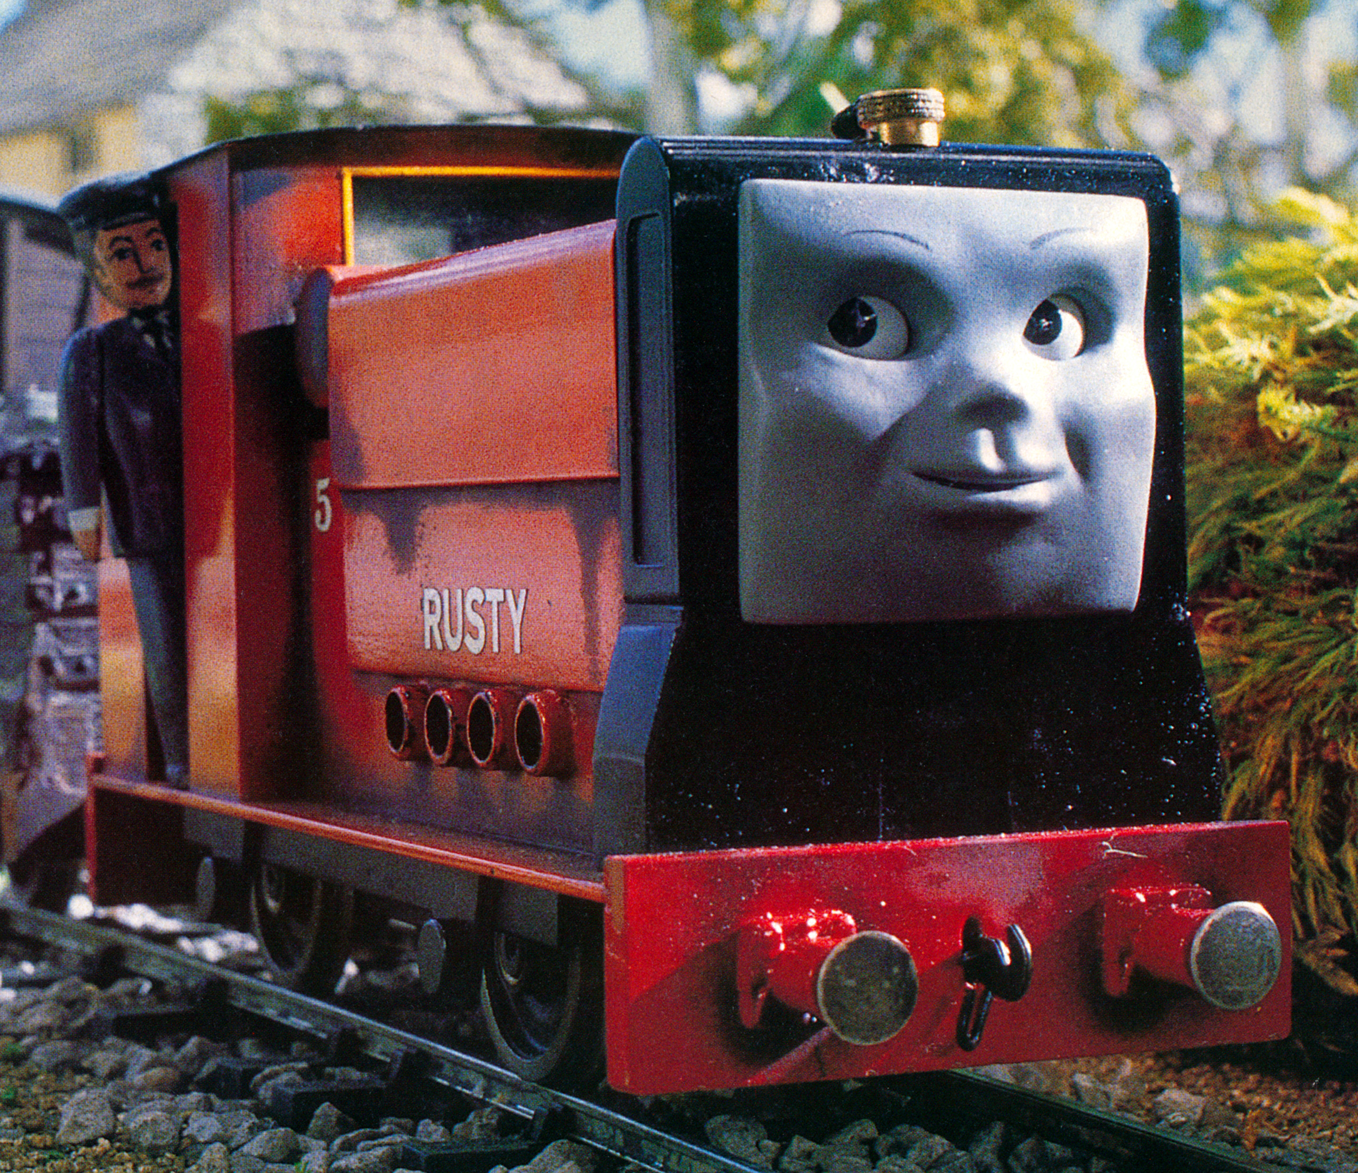 rusty thomas and friends